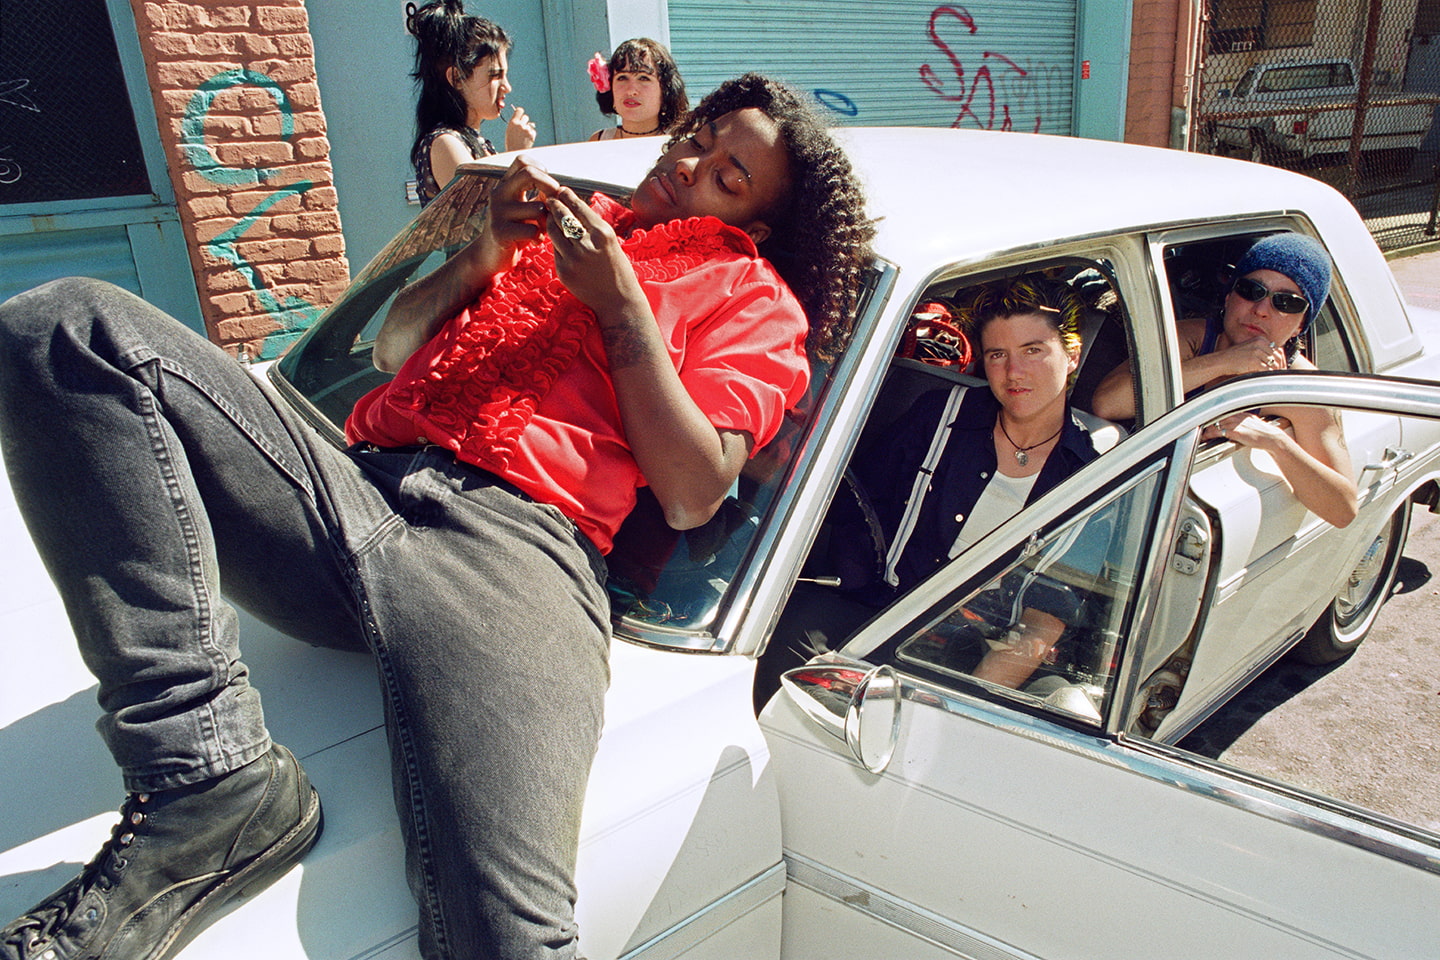 Five people in and around a white car. One person lays on top of the hood; they wear a red tuxedo shirt with ruffles.